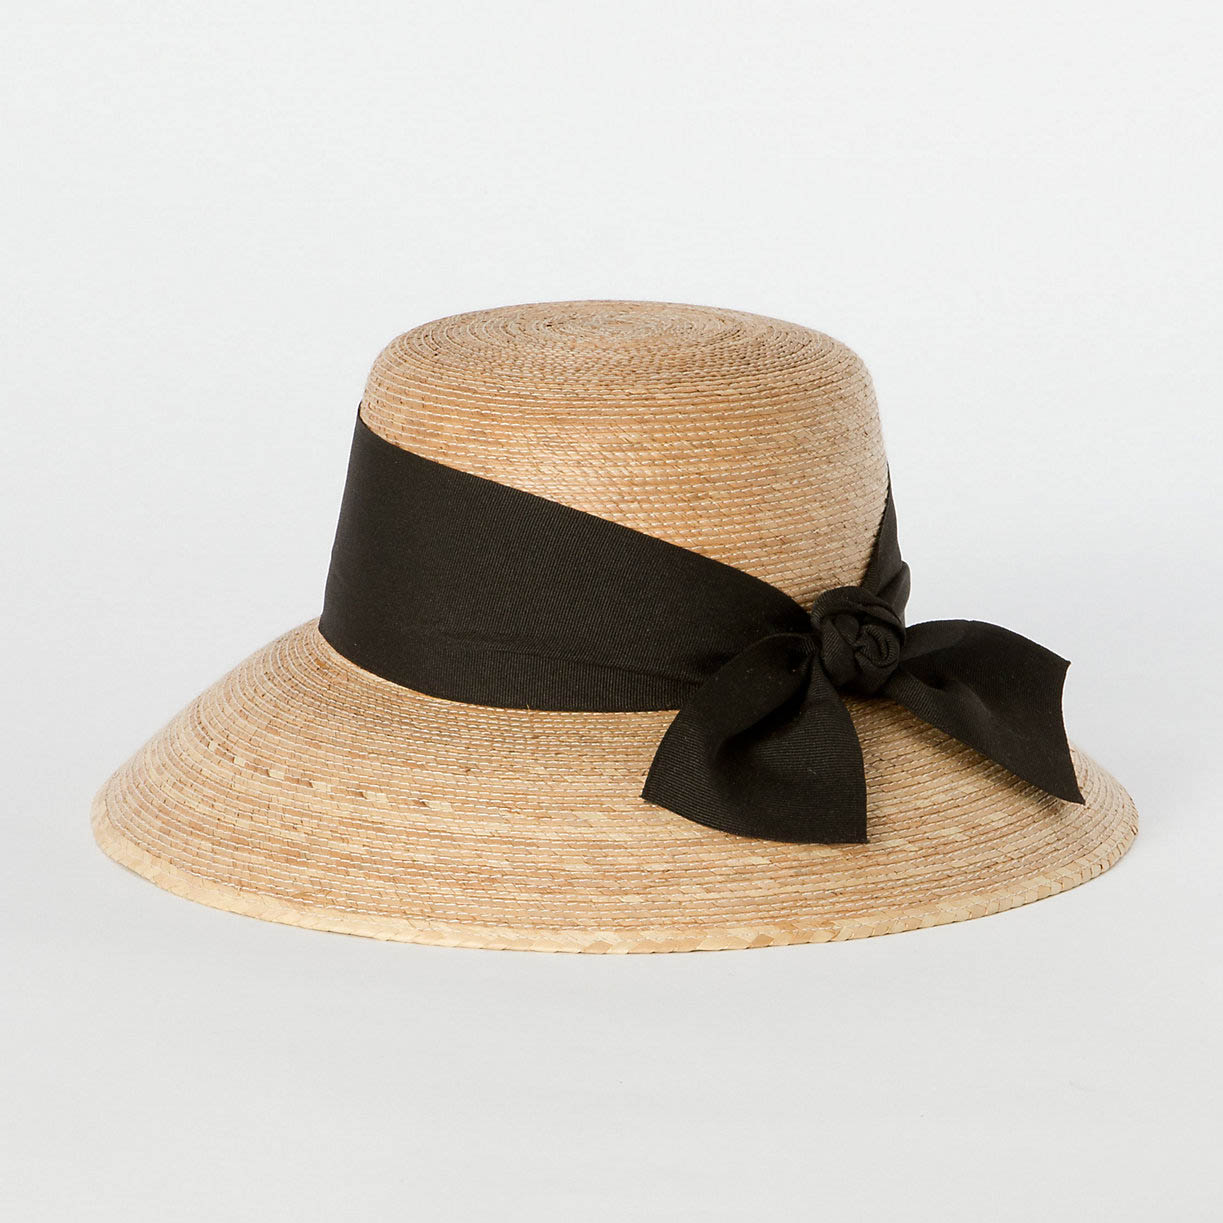 A straw sunhat with a black bow